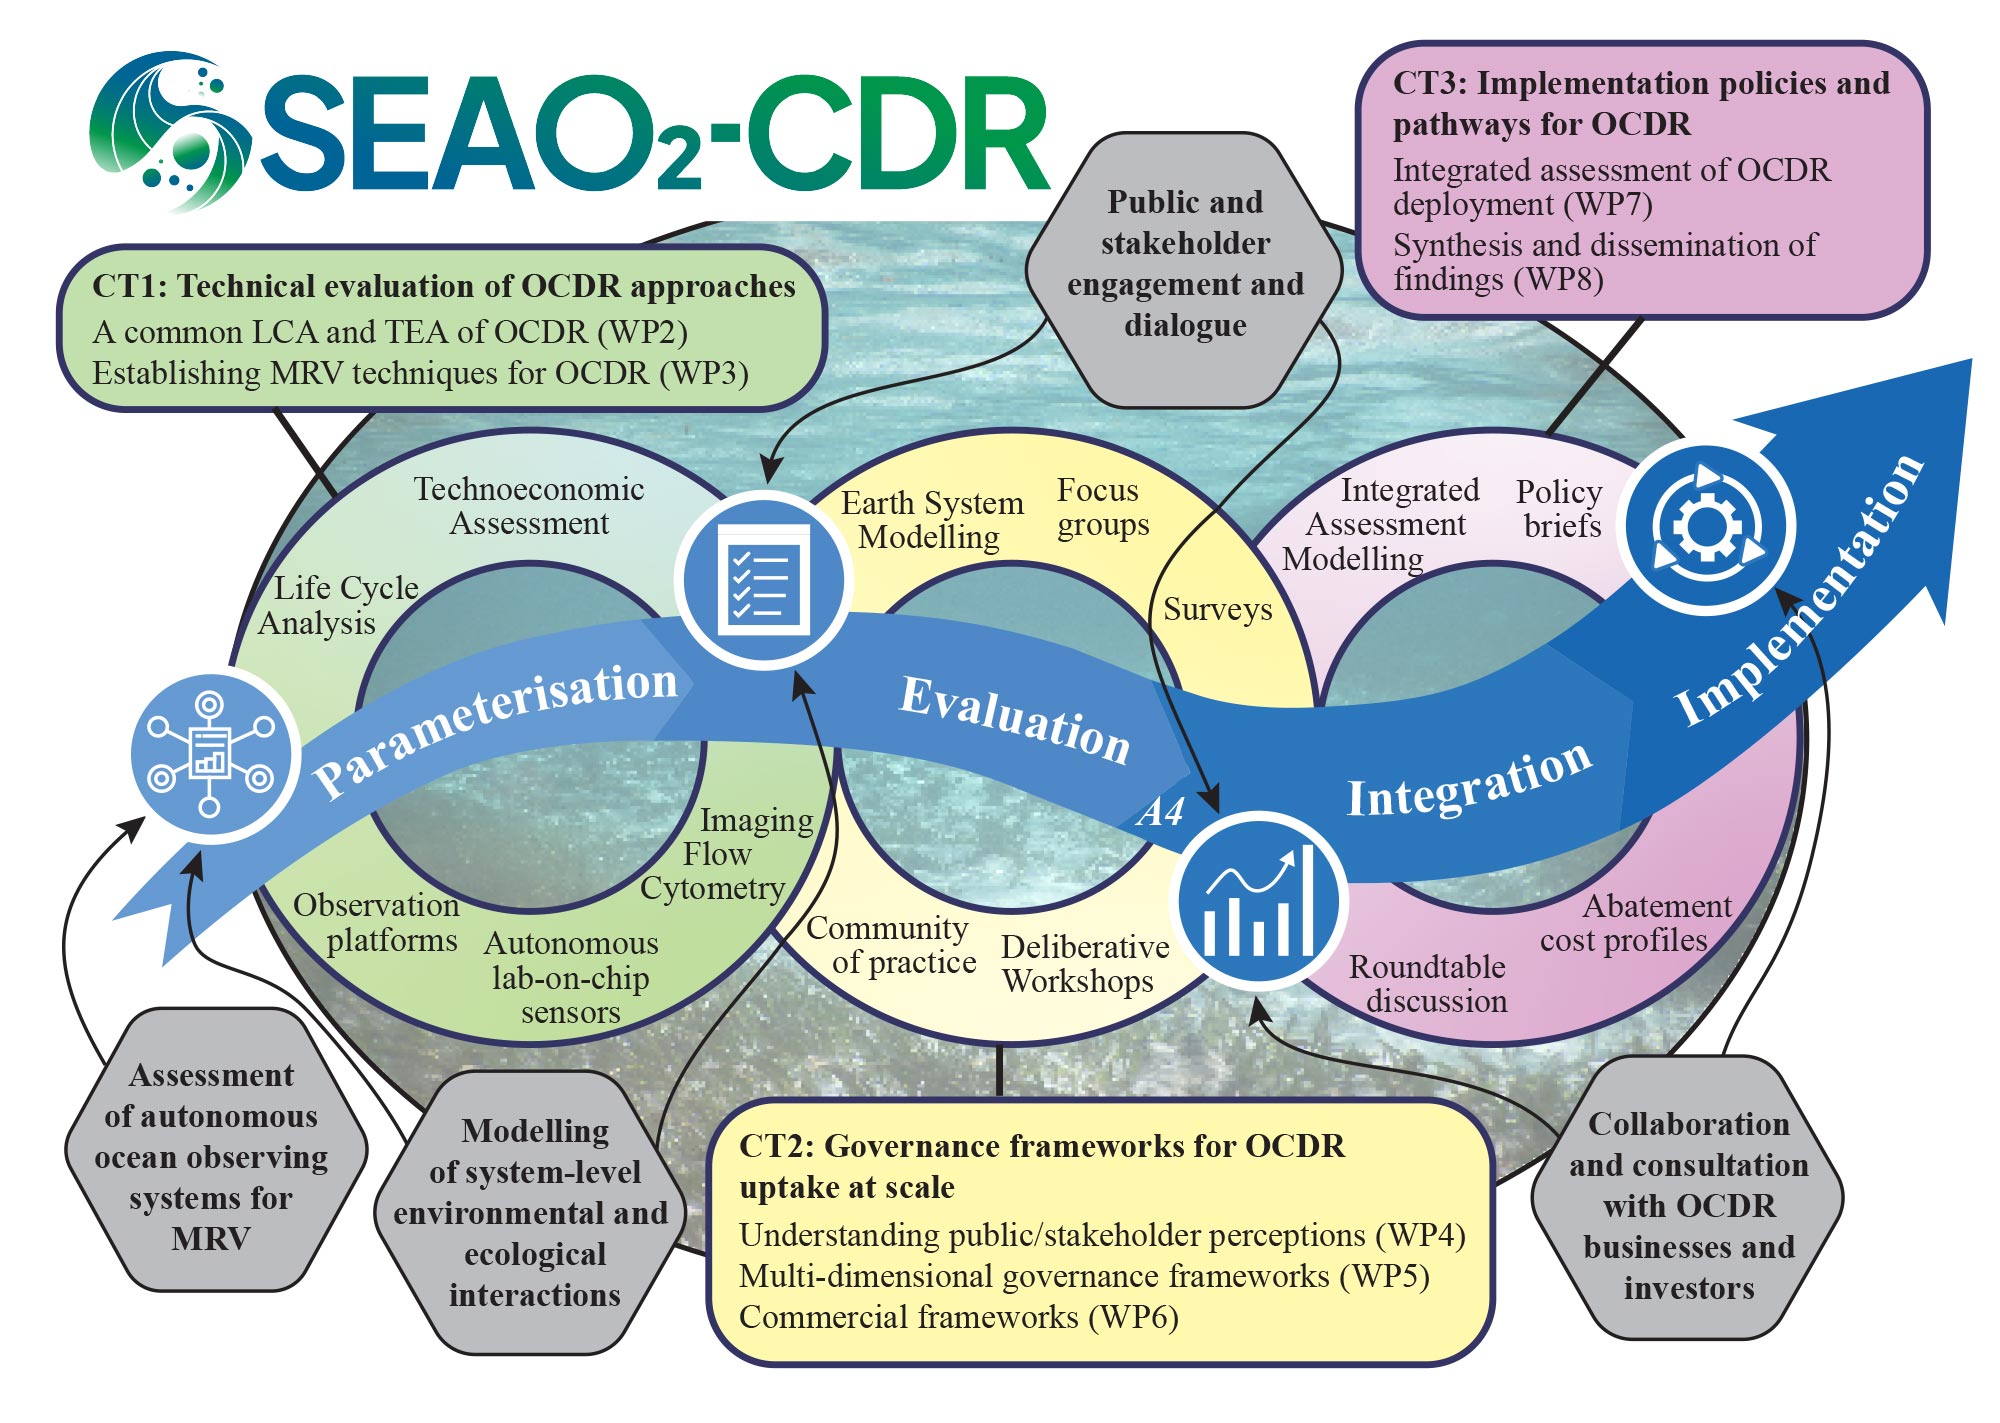 SEAO2-CDR schematic - view enlarged version